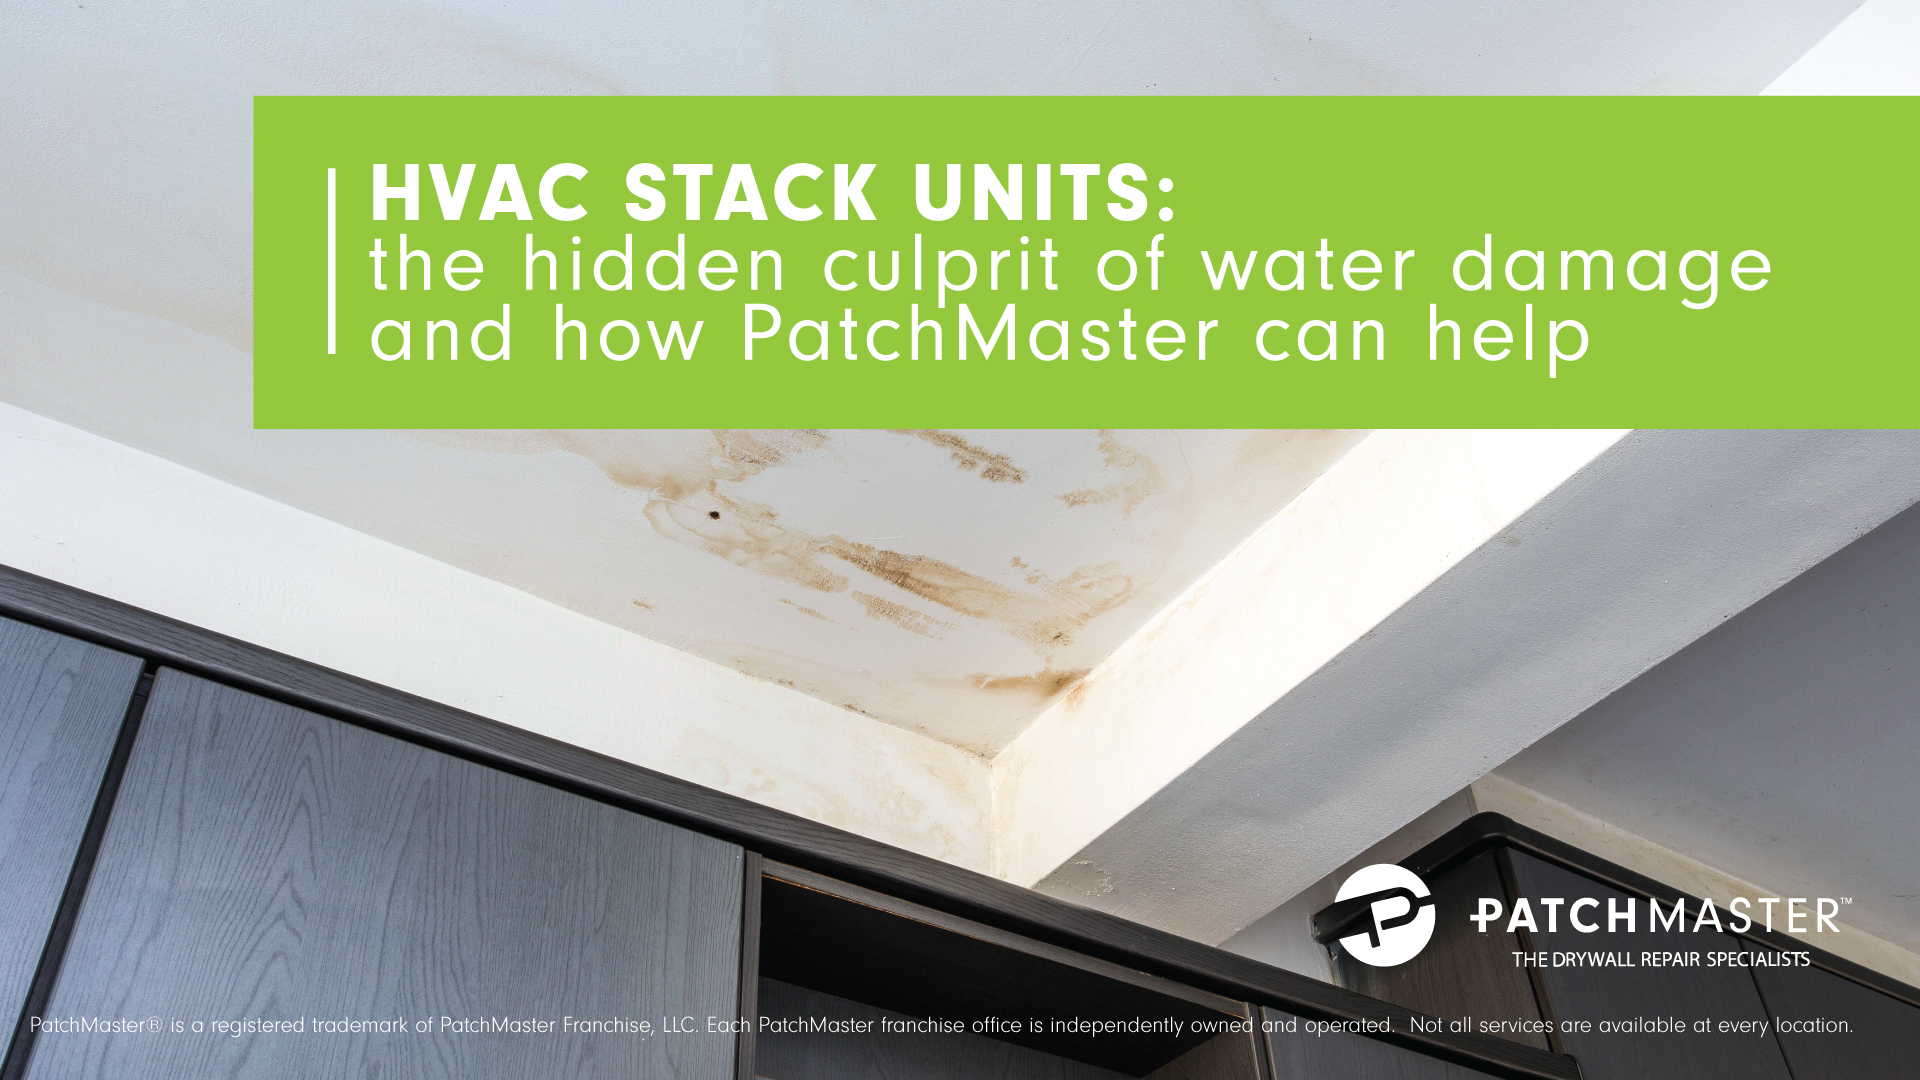 HVAC Stack Units: The Hidden Culprit of Water Damage and How PatchMaster Can Help